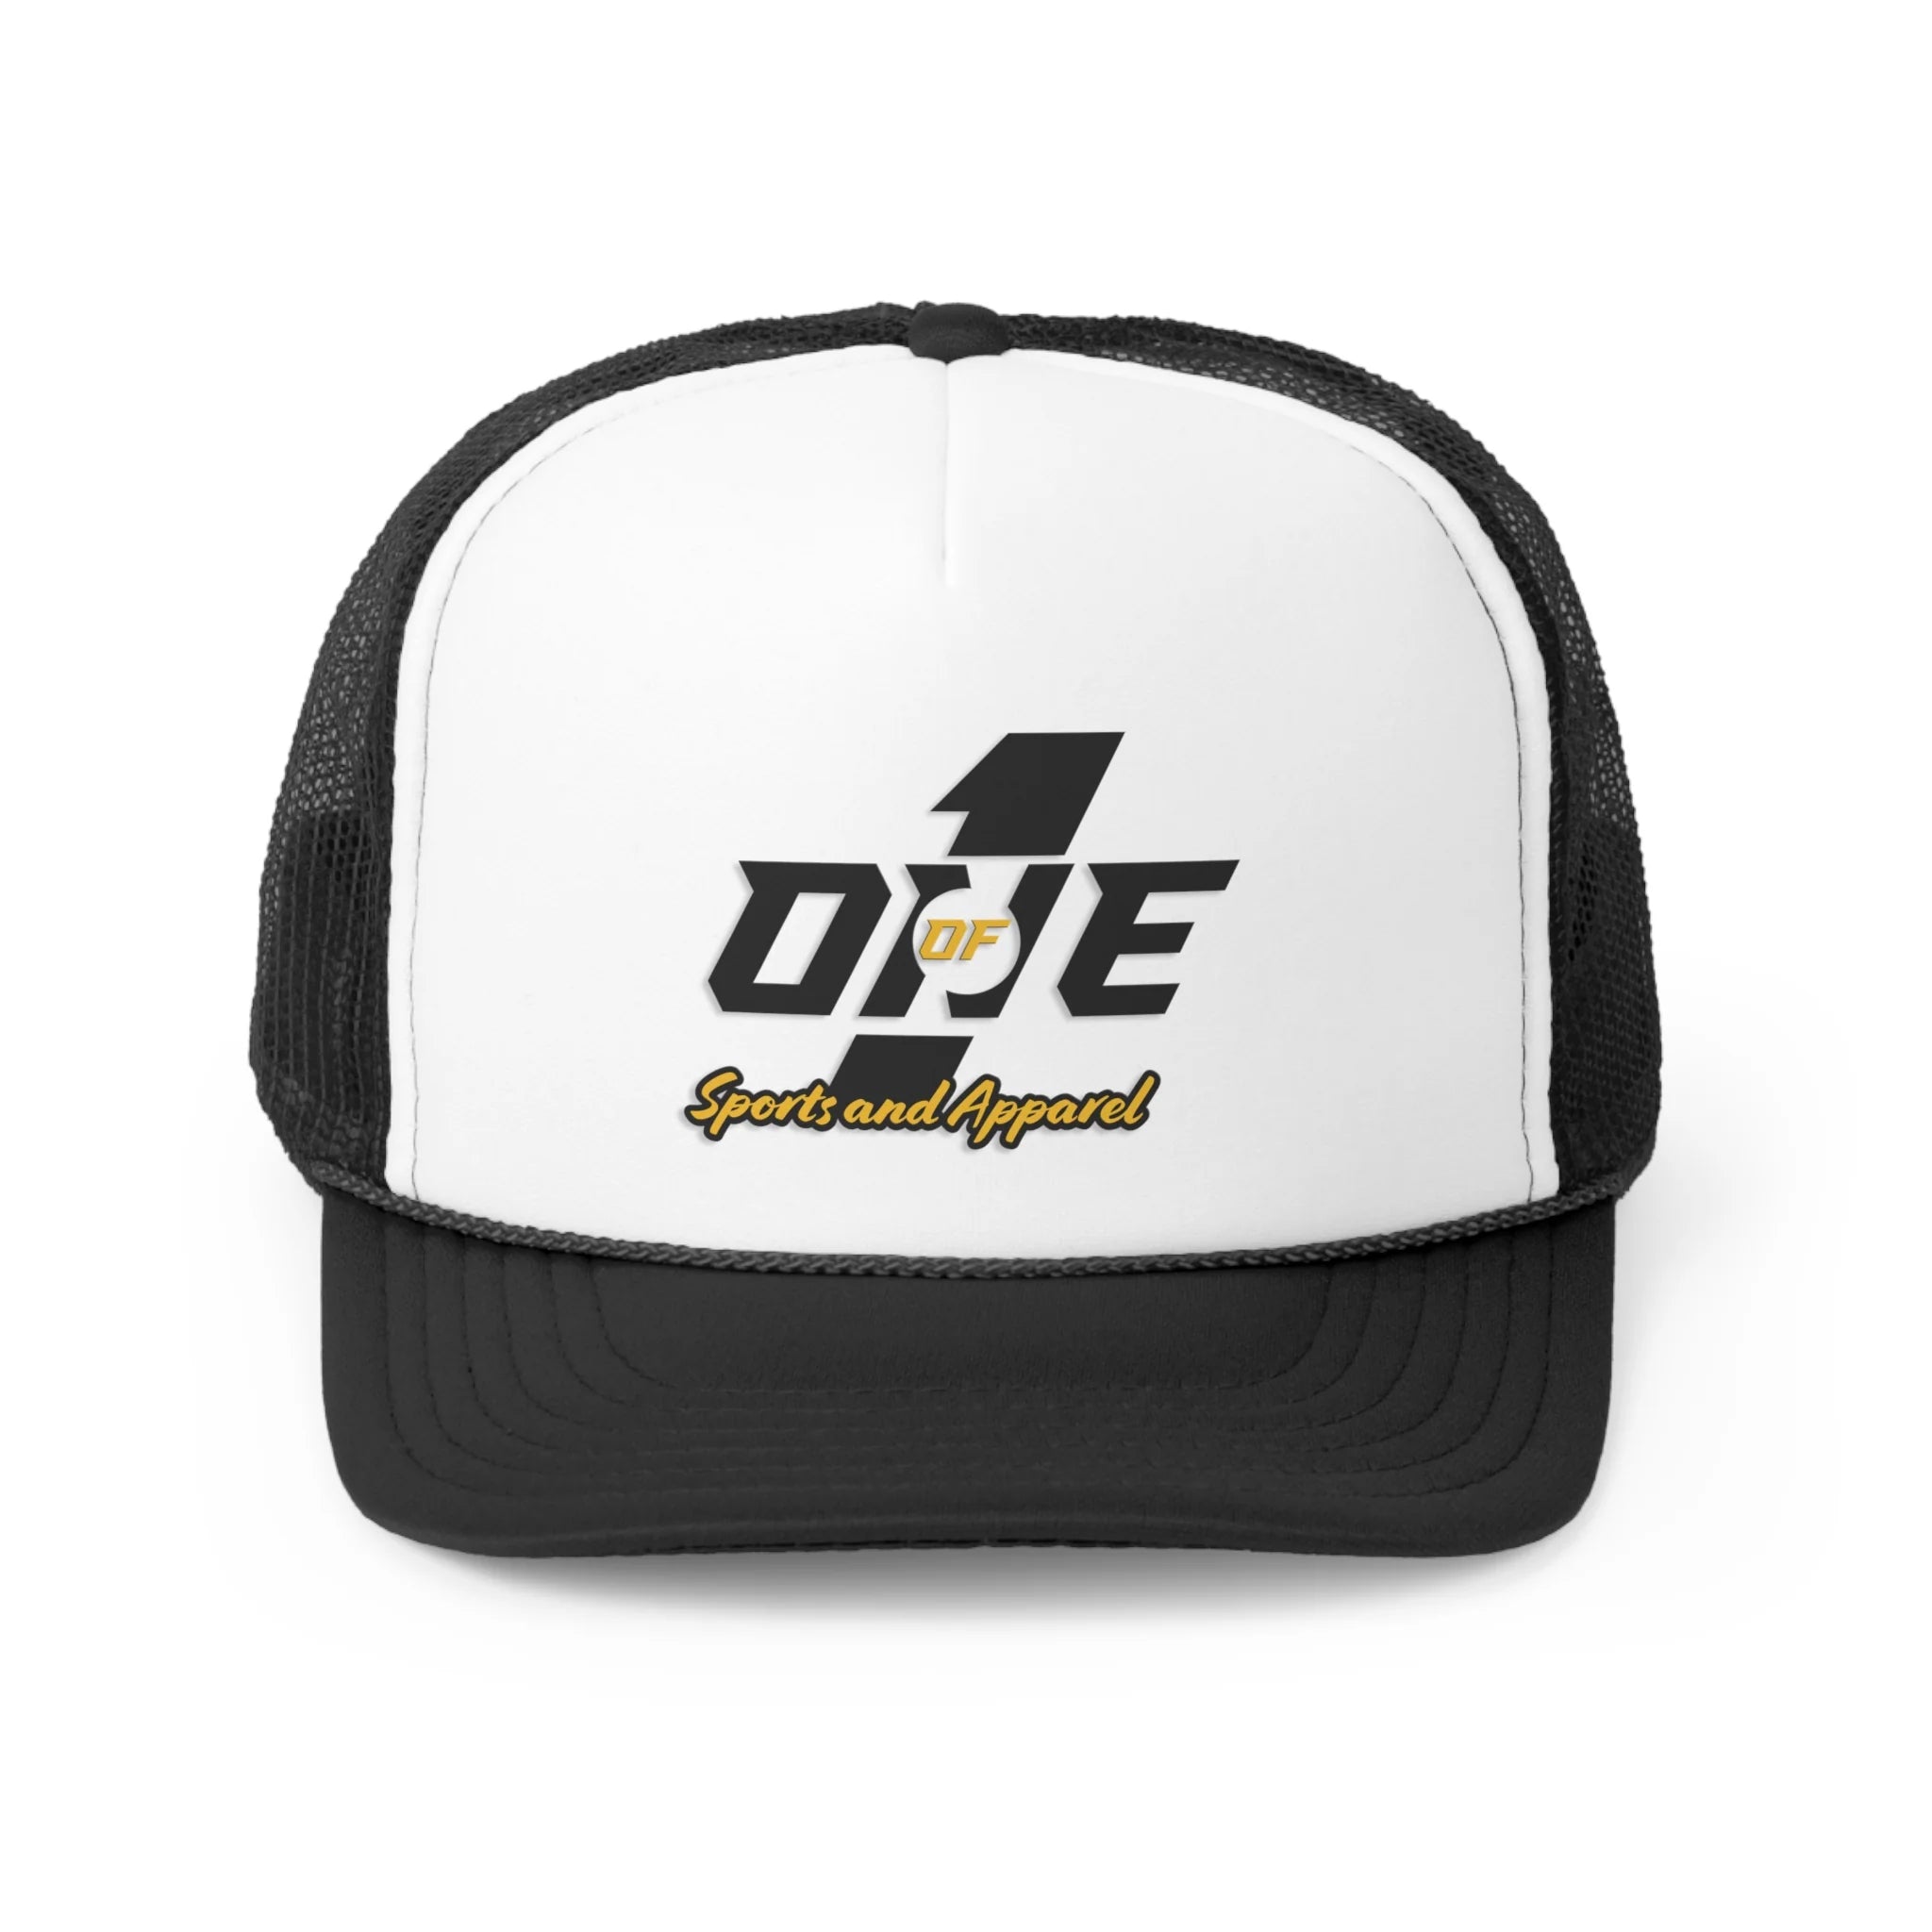 Trucker Caps are the Perfect Gifts for Sports Lovers.